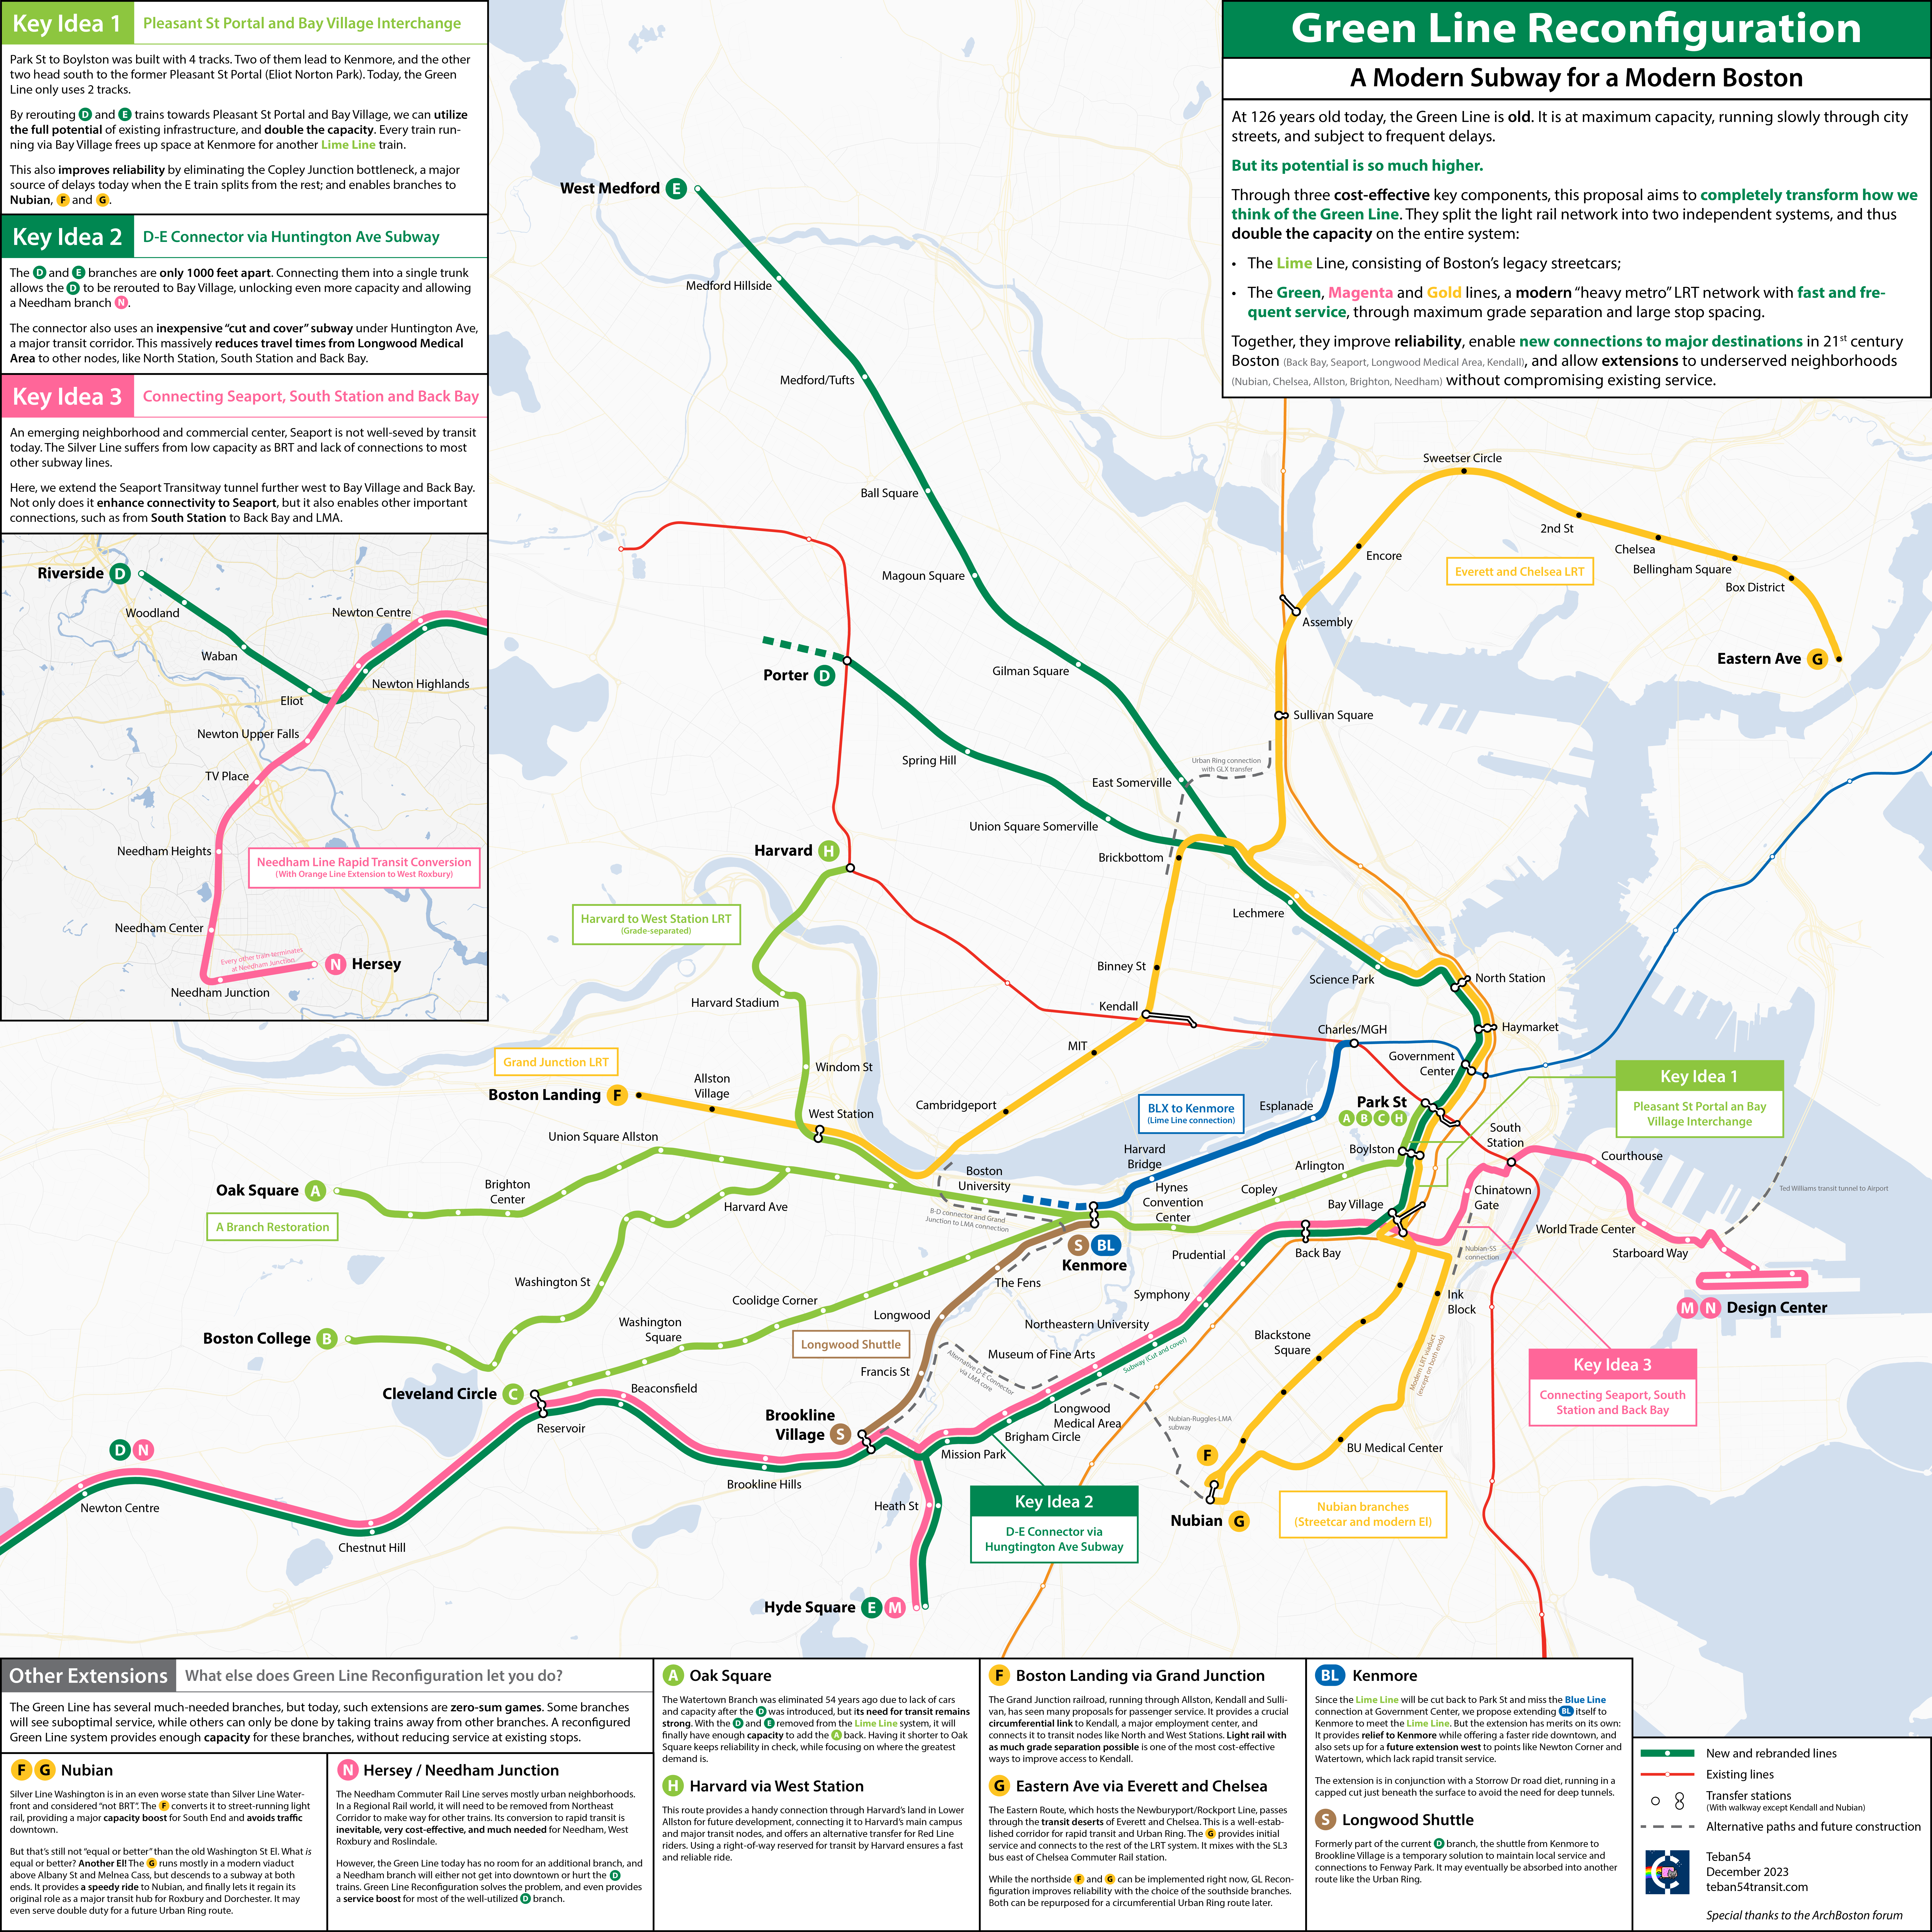 [Map] Green Line Reconfiguration: A Modern Subway for a Modern Boston